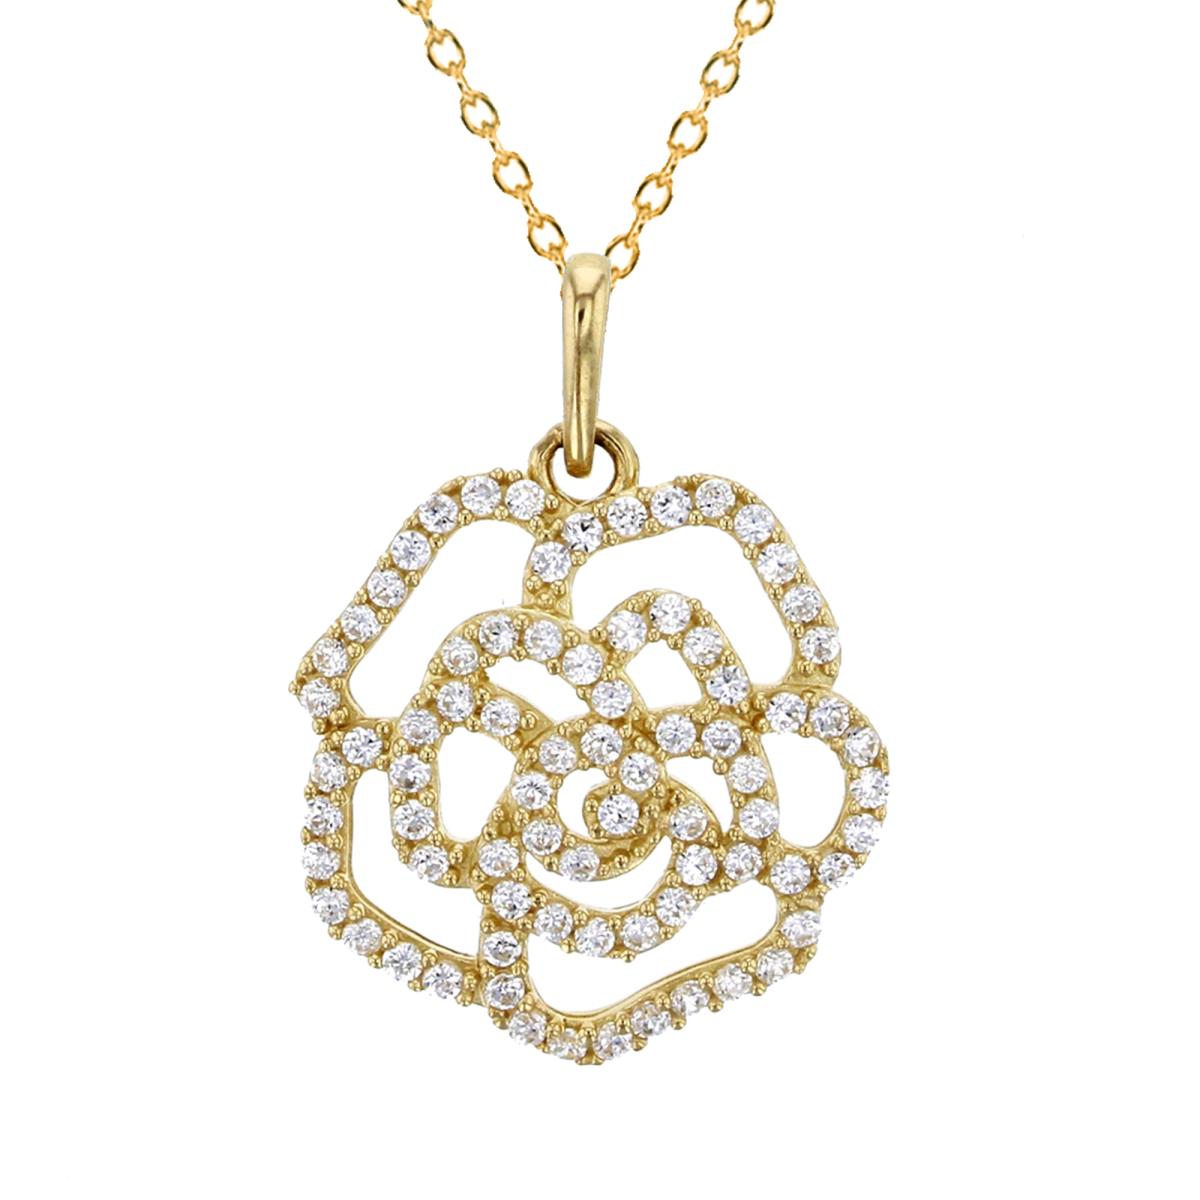 14K Yellow Gold Micropave Round CZ 20x15mm Filigree Rose 18" Necklace